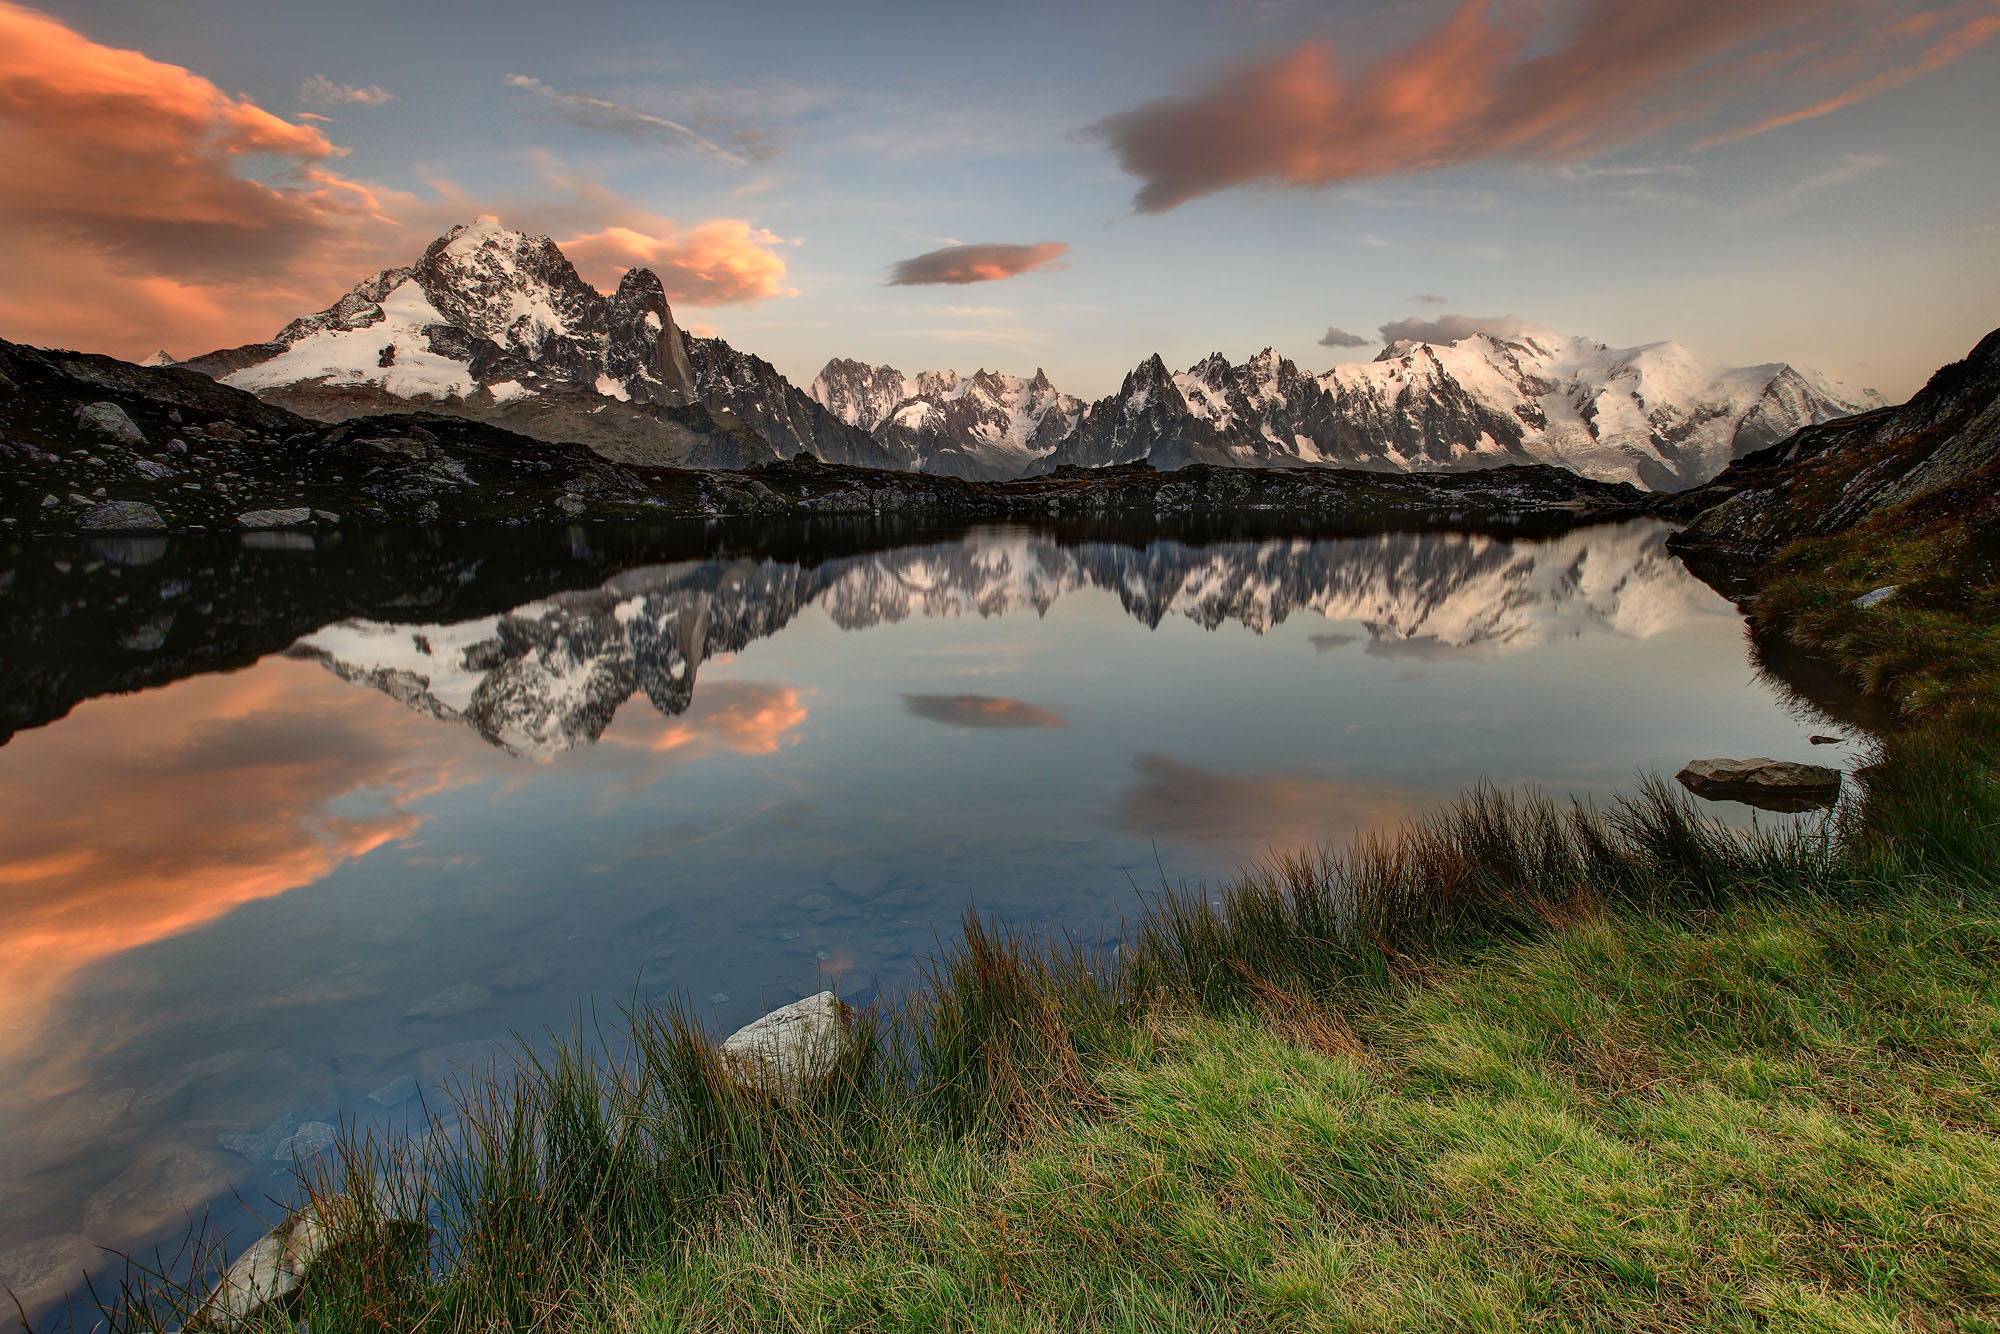 The Mont Blanc massif in the French Alps reflecting in Lac de Cheserys above Chamonix with foehn clouds at sunset